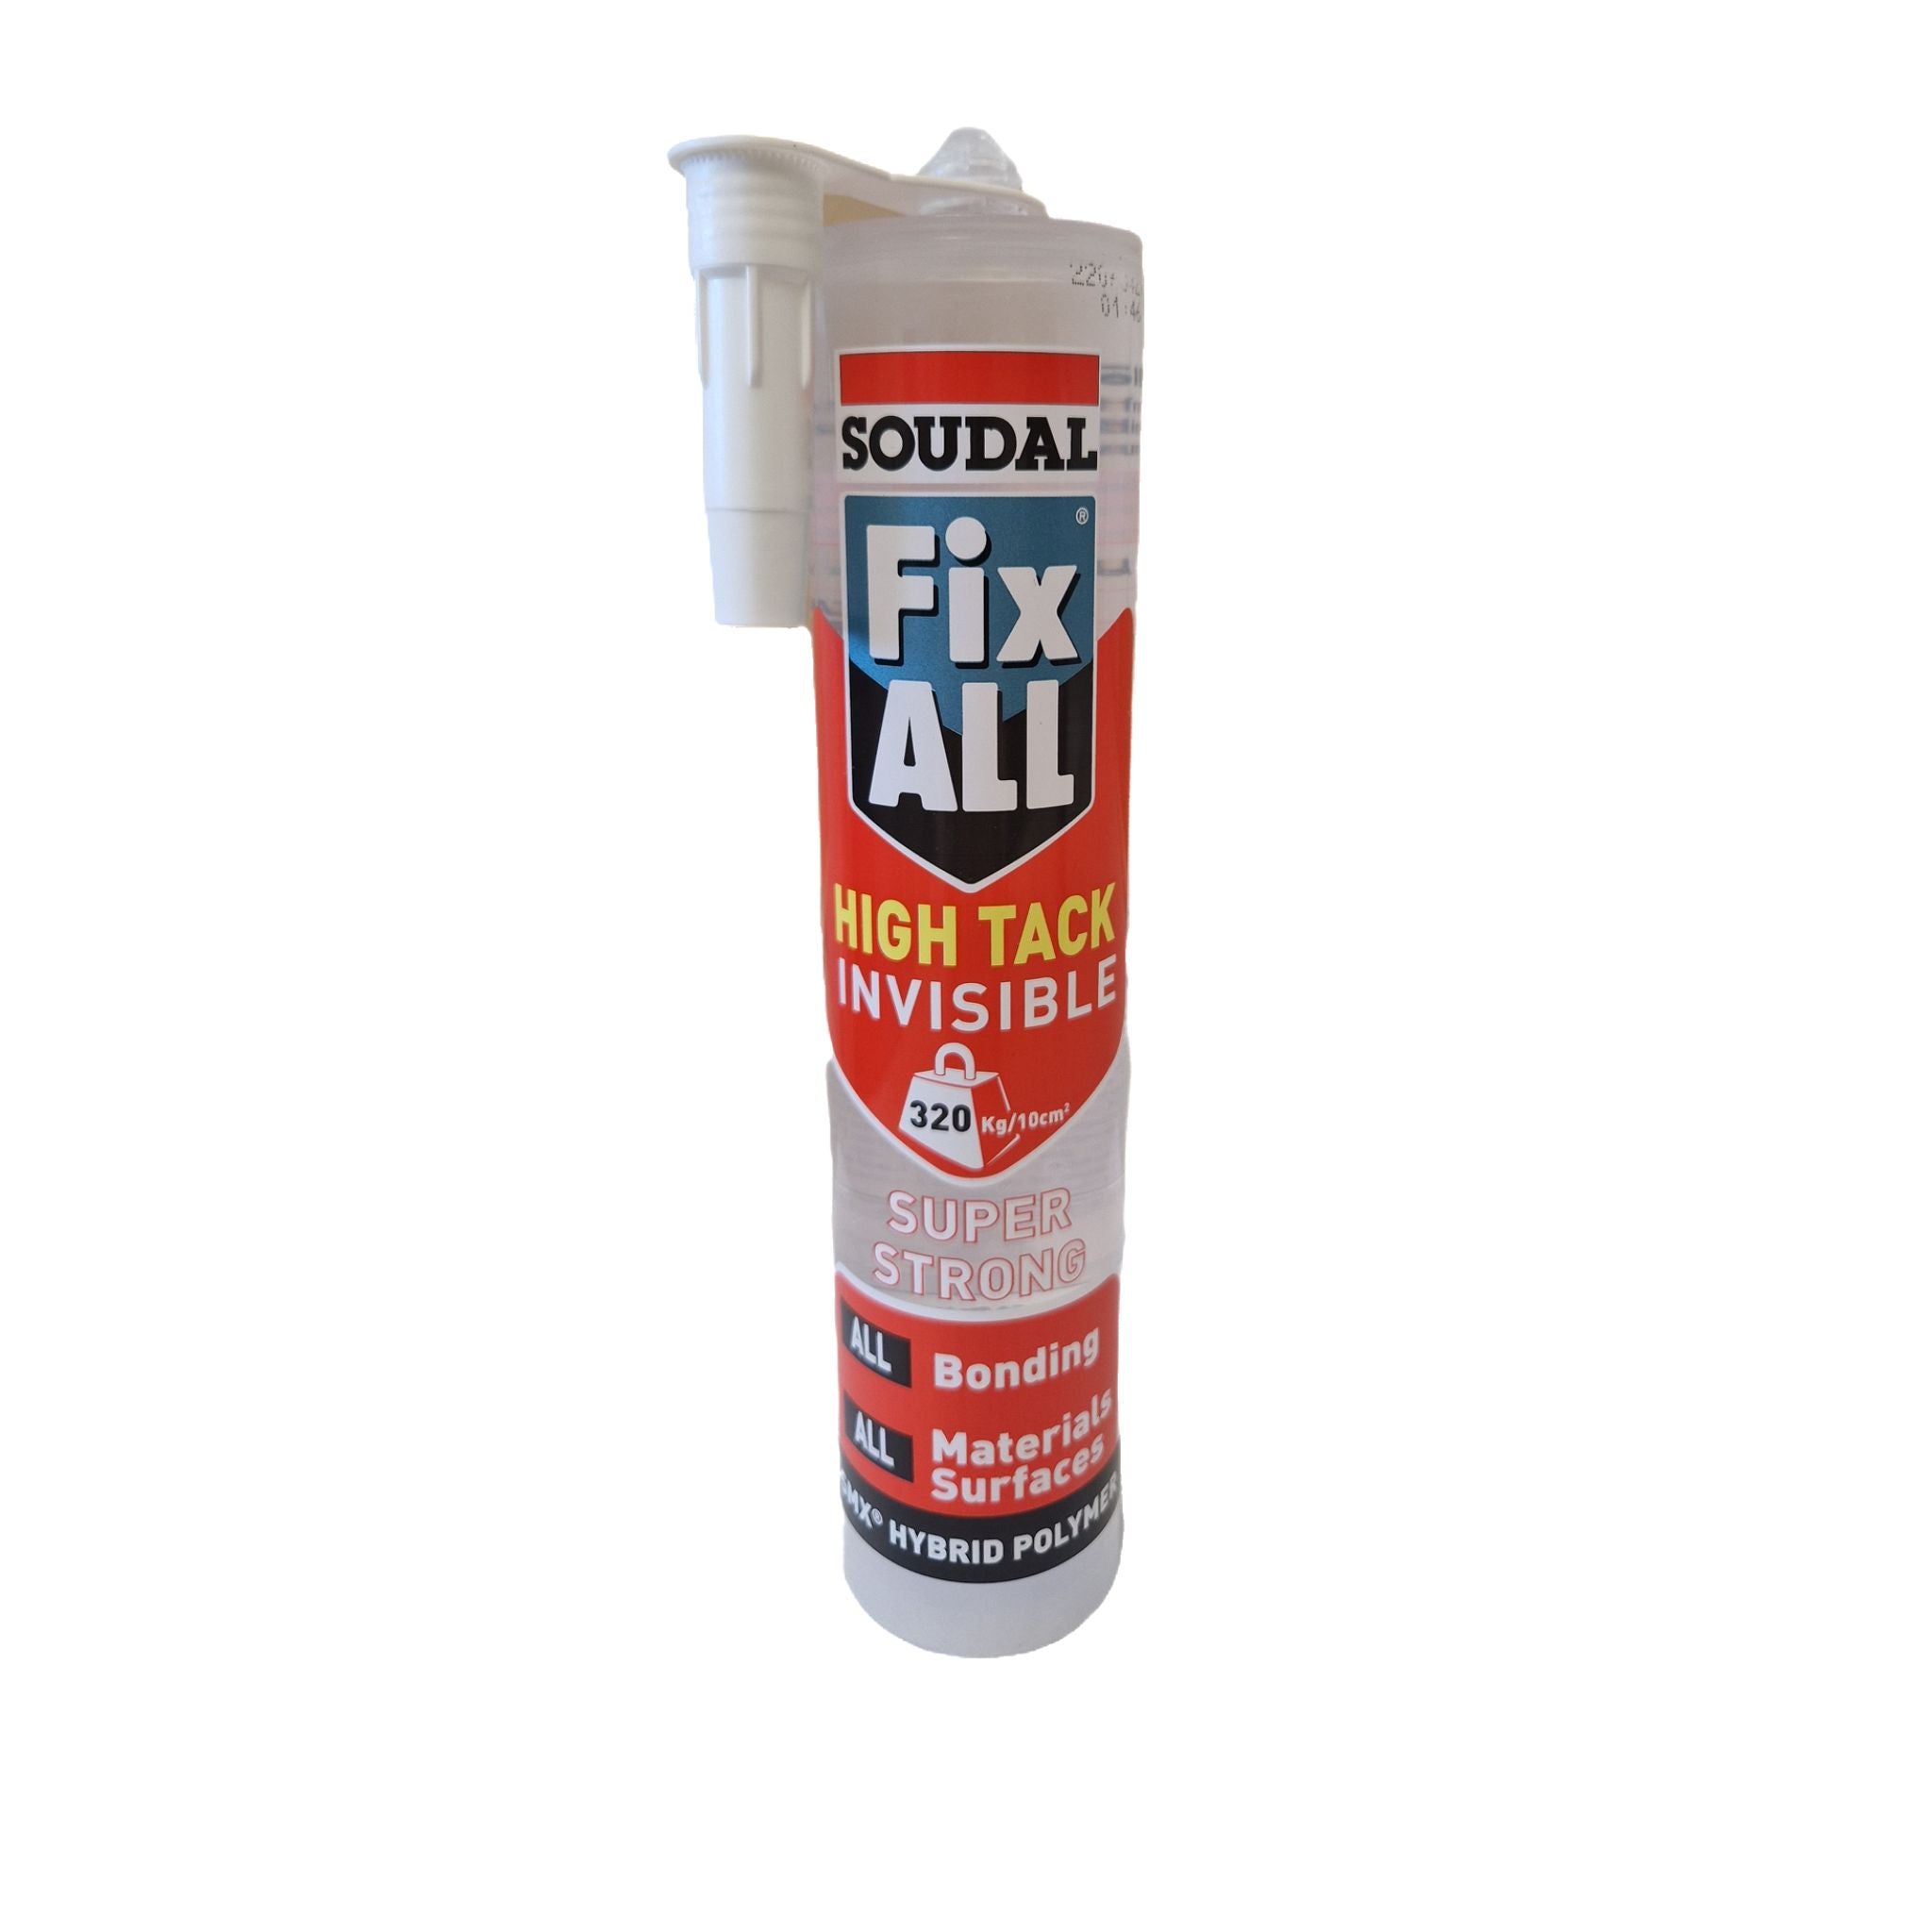 Soudal Fix All High Tack Invisible Clear Adhesive 290ml - Restorate-5411183138209